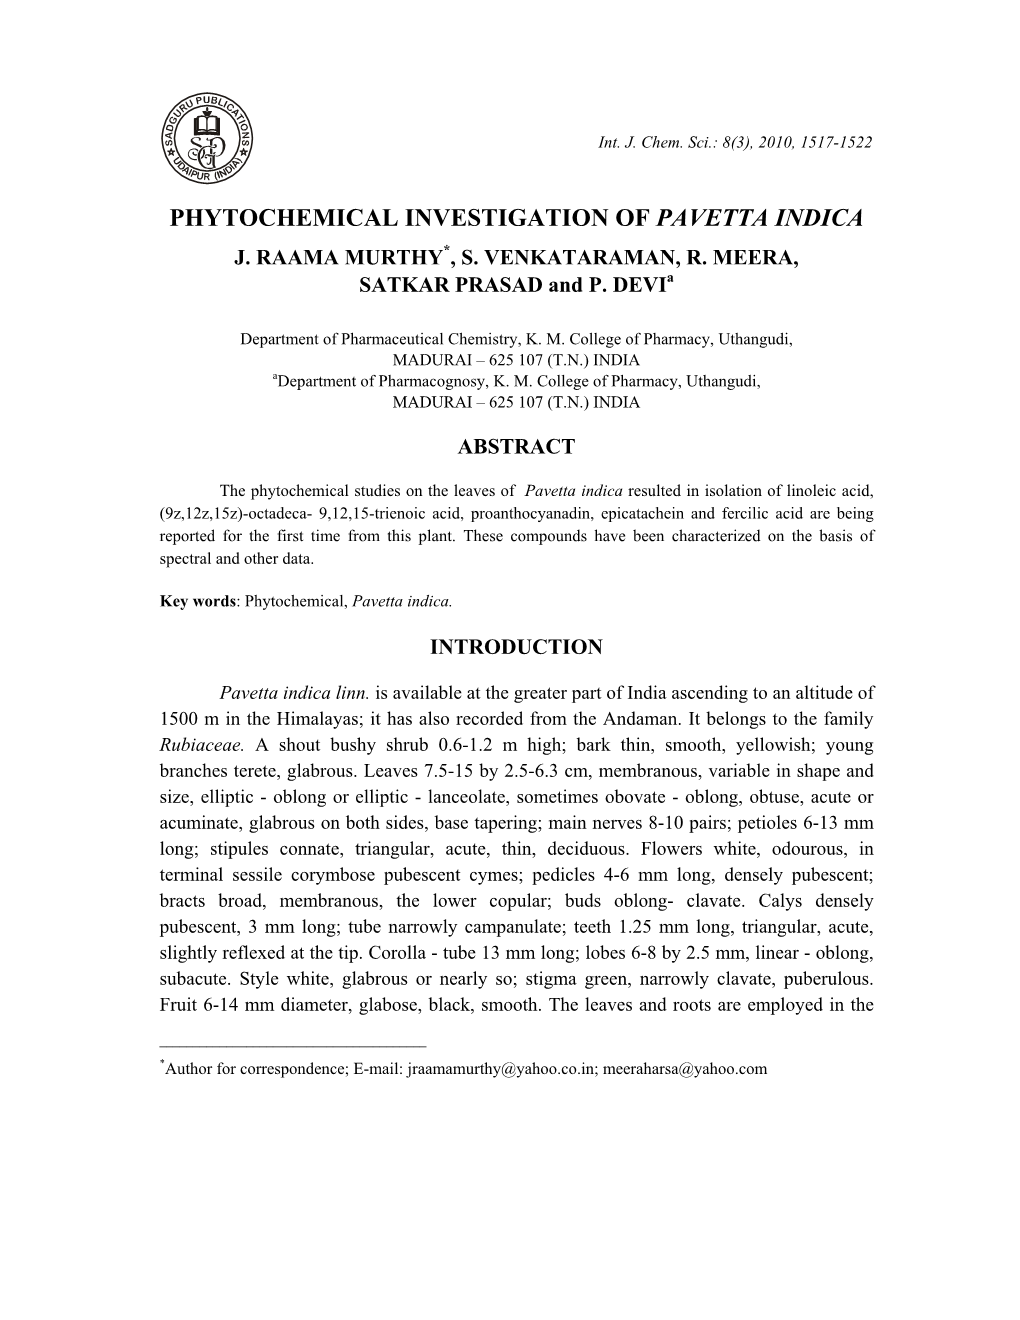 Phytochemical Investigation of Pavetta Indica J